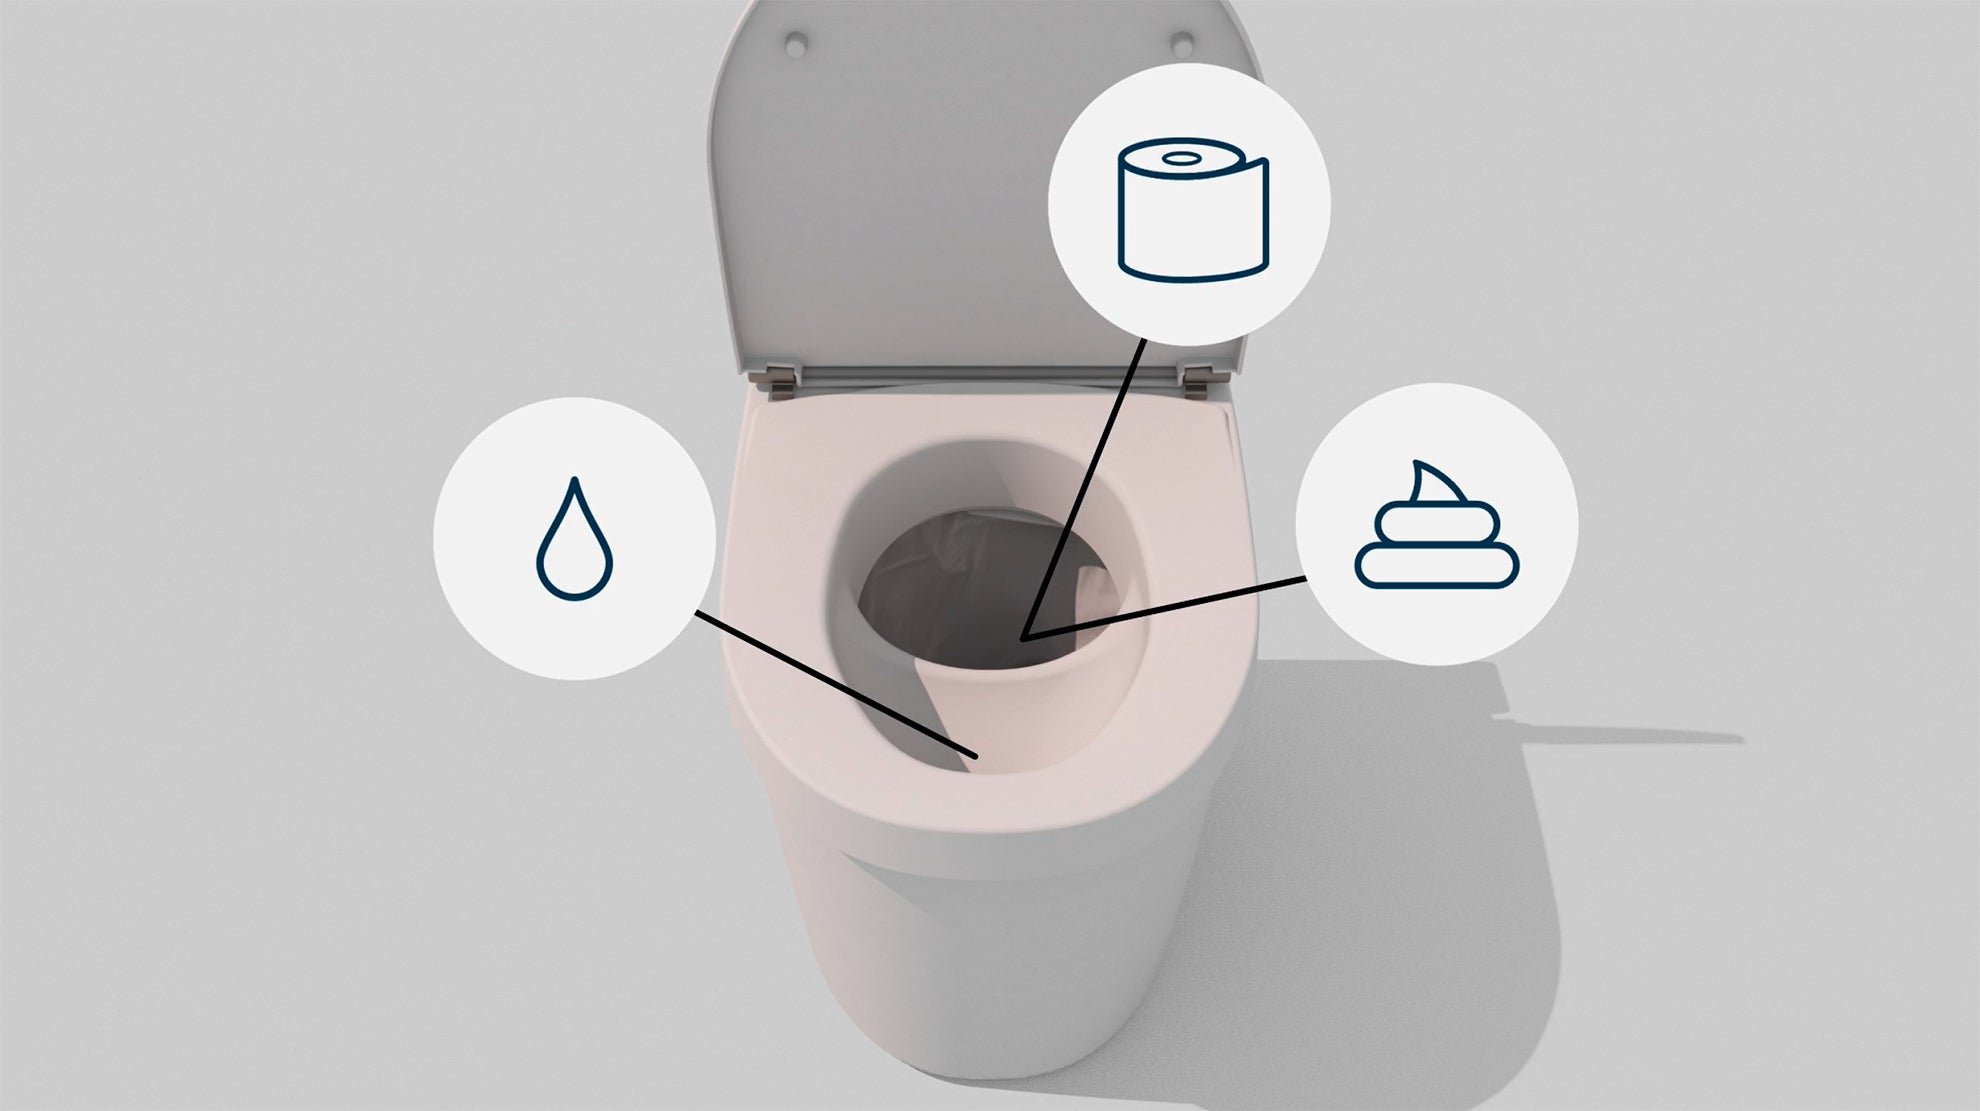 Load video: Separett Tiny with urine container video about use of the toilet